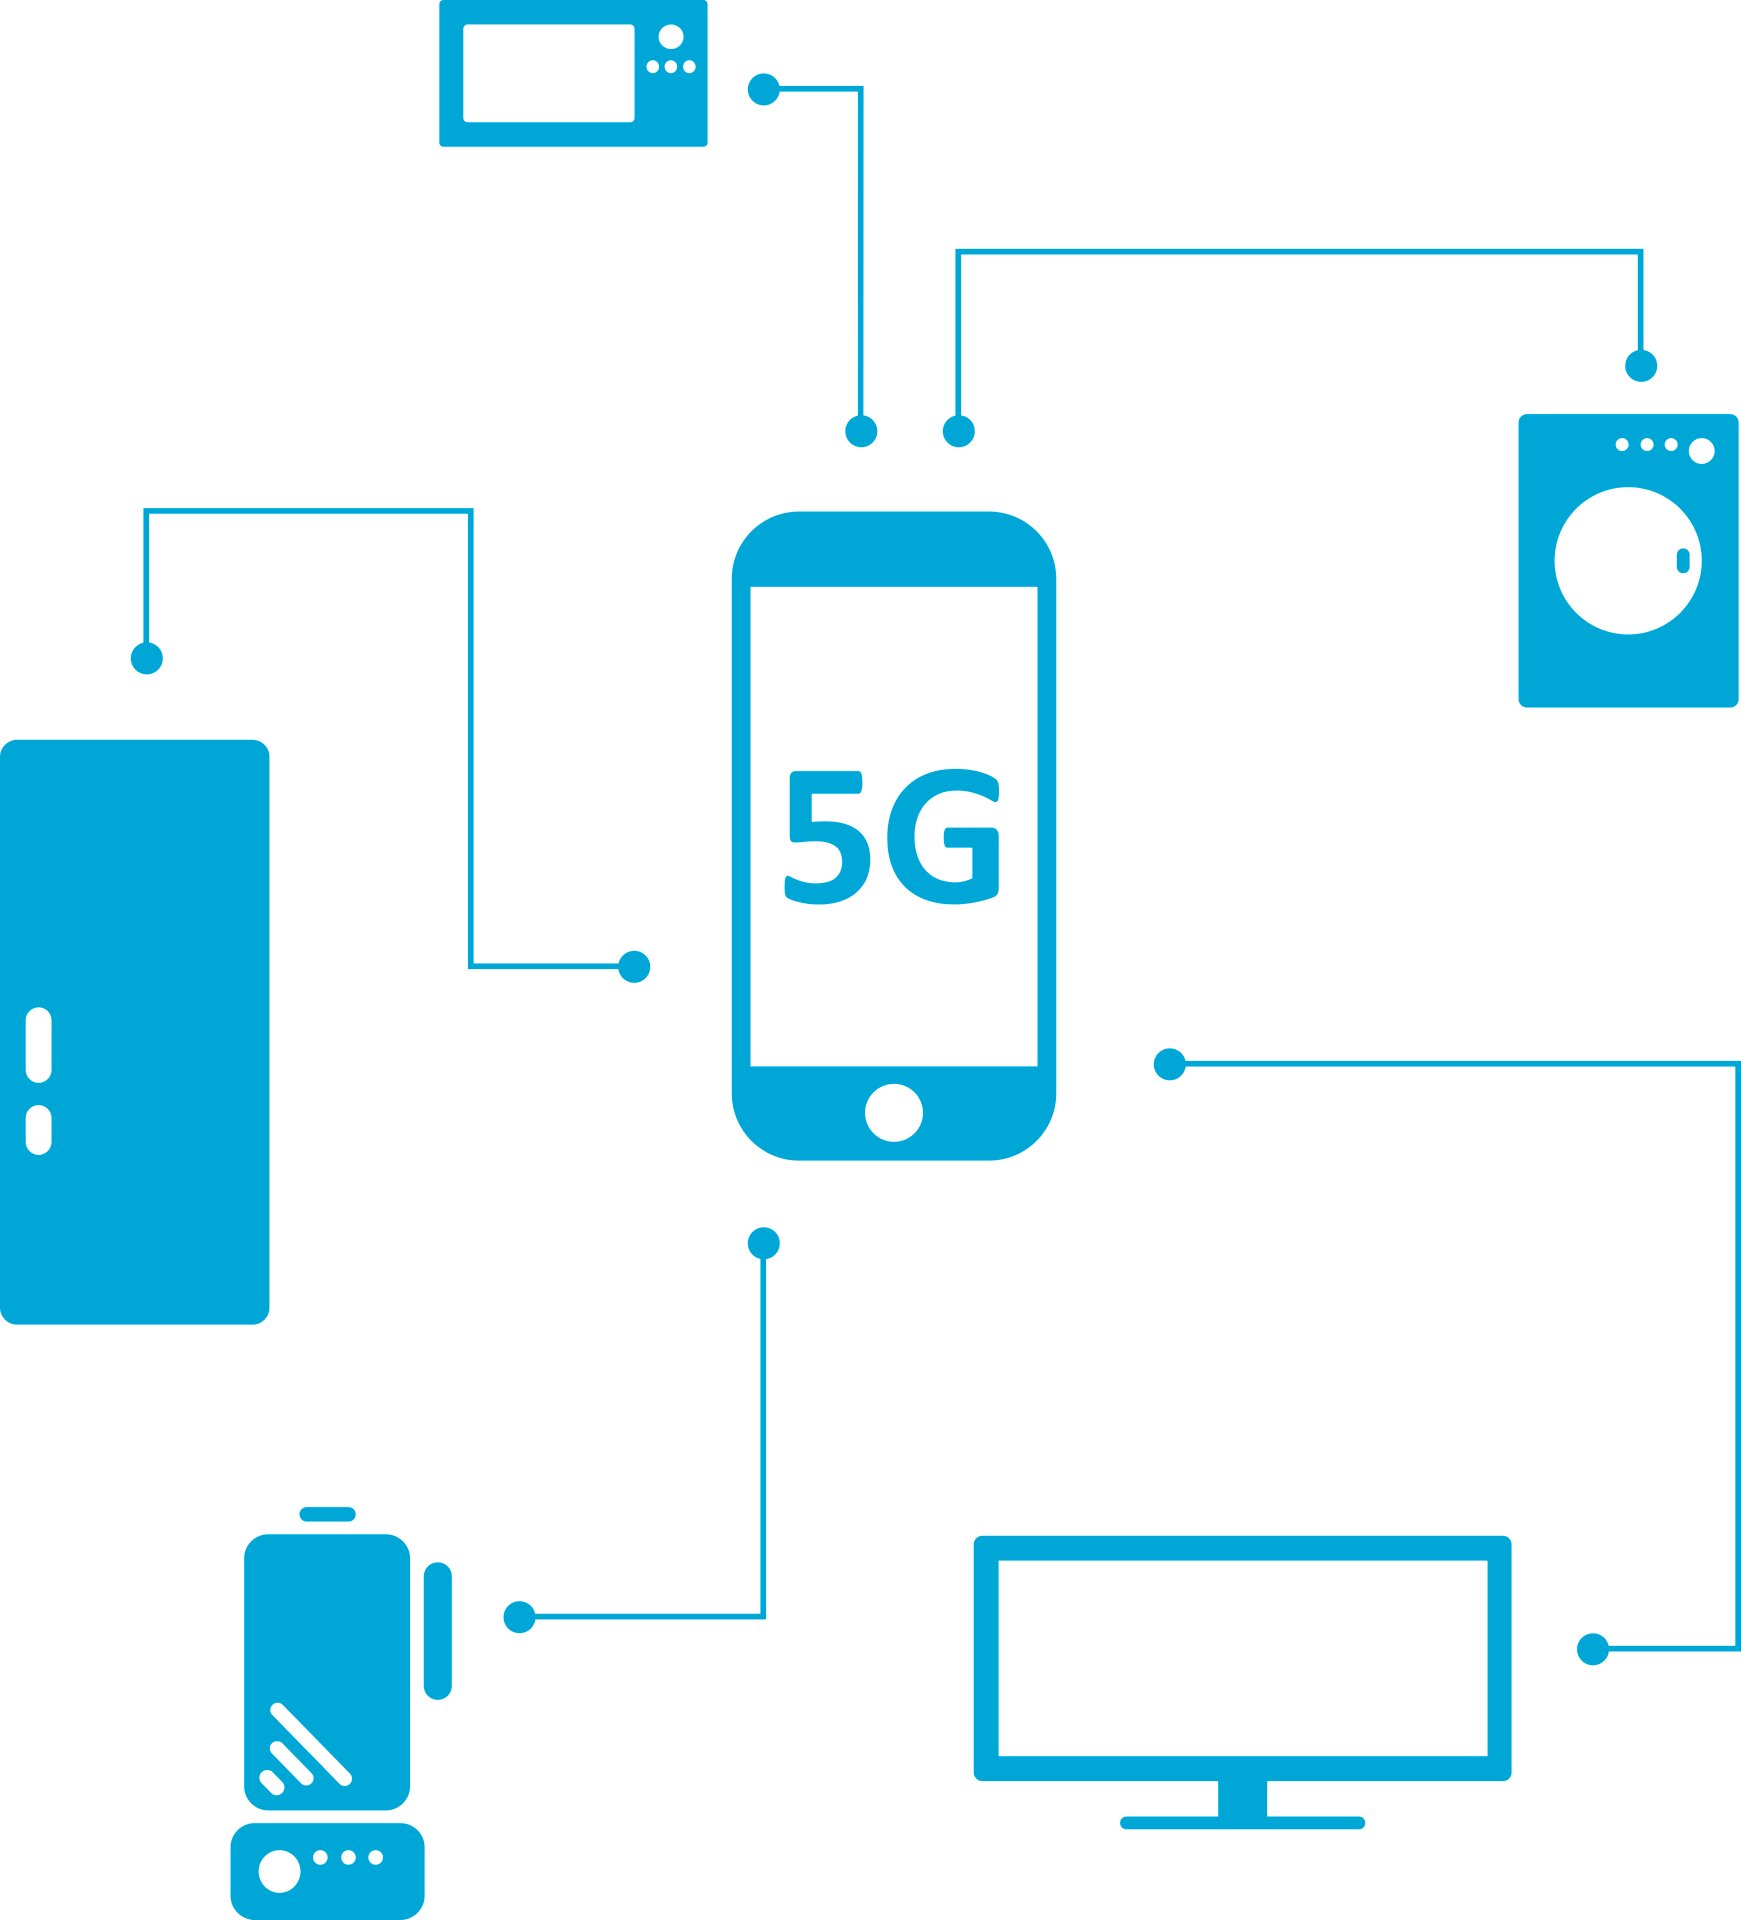 More evidence needed to establish 5G's green credentials